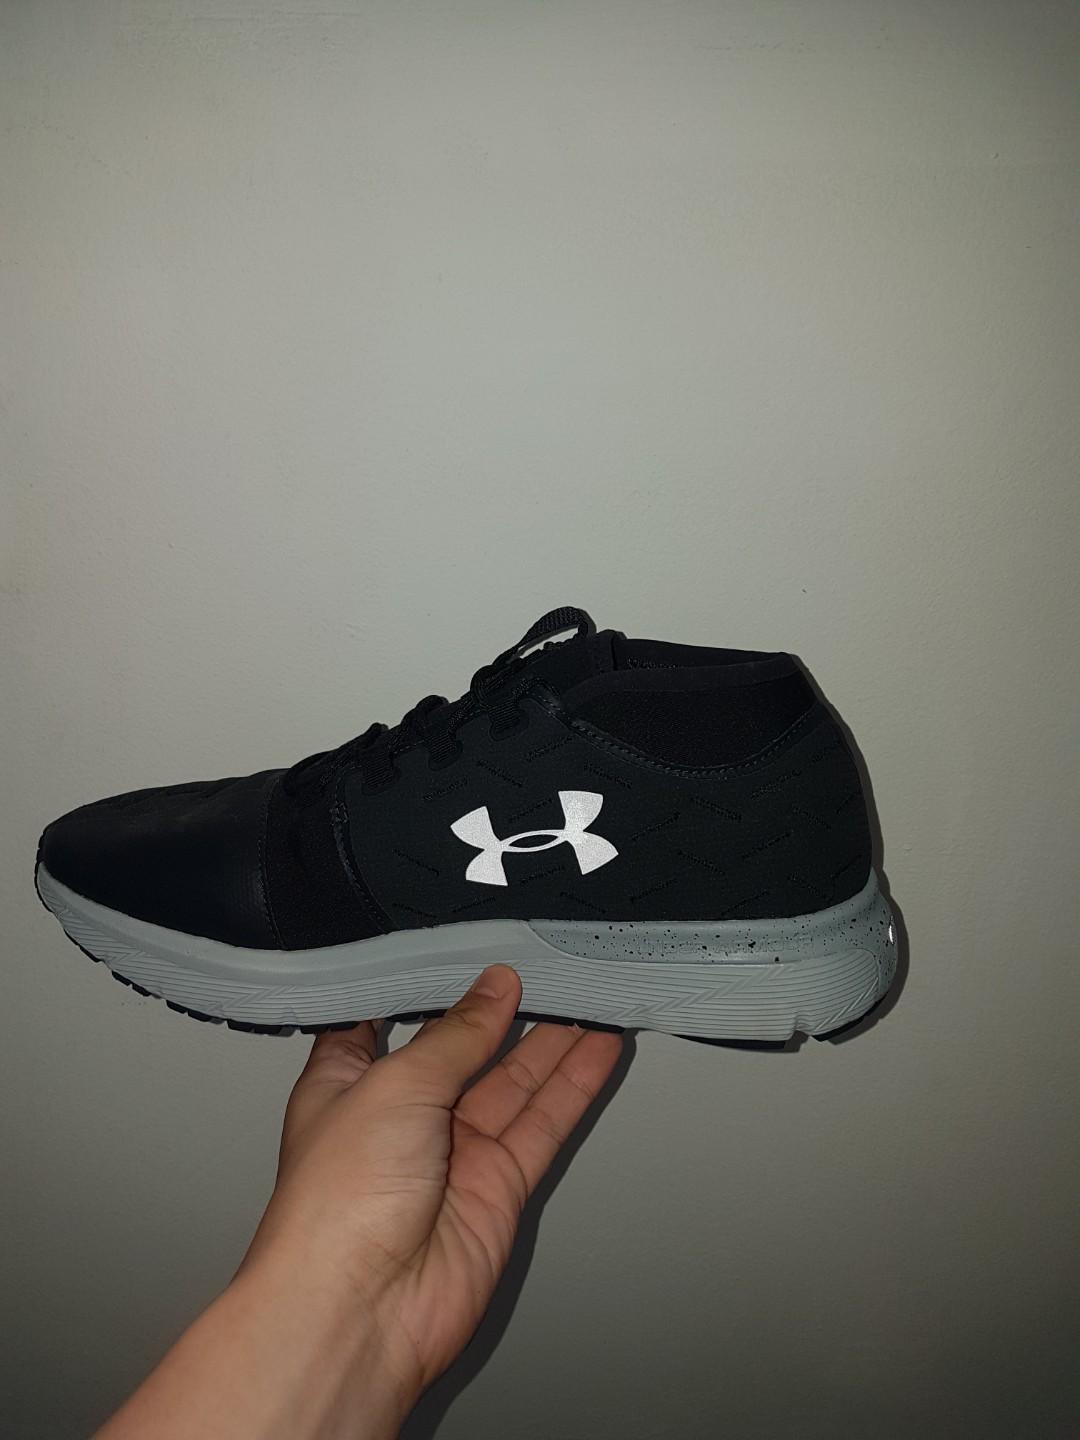 UNDER ARMOUR CHARGED REACTOR RUN, Men's 